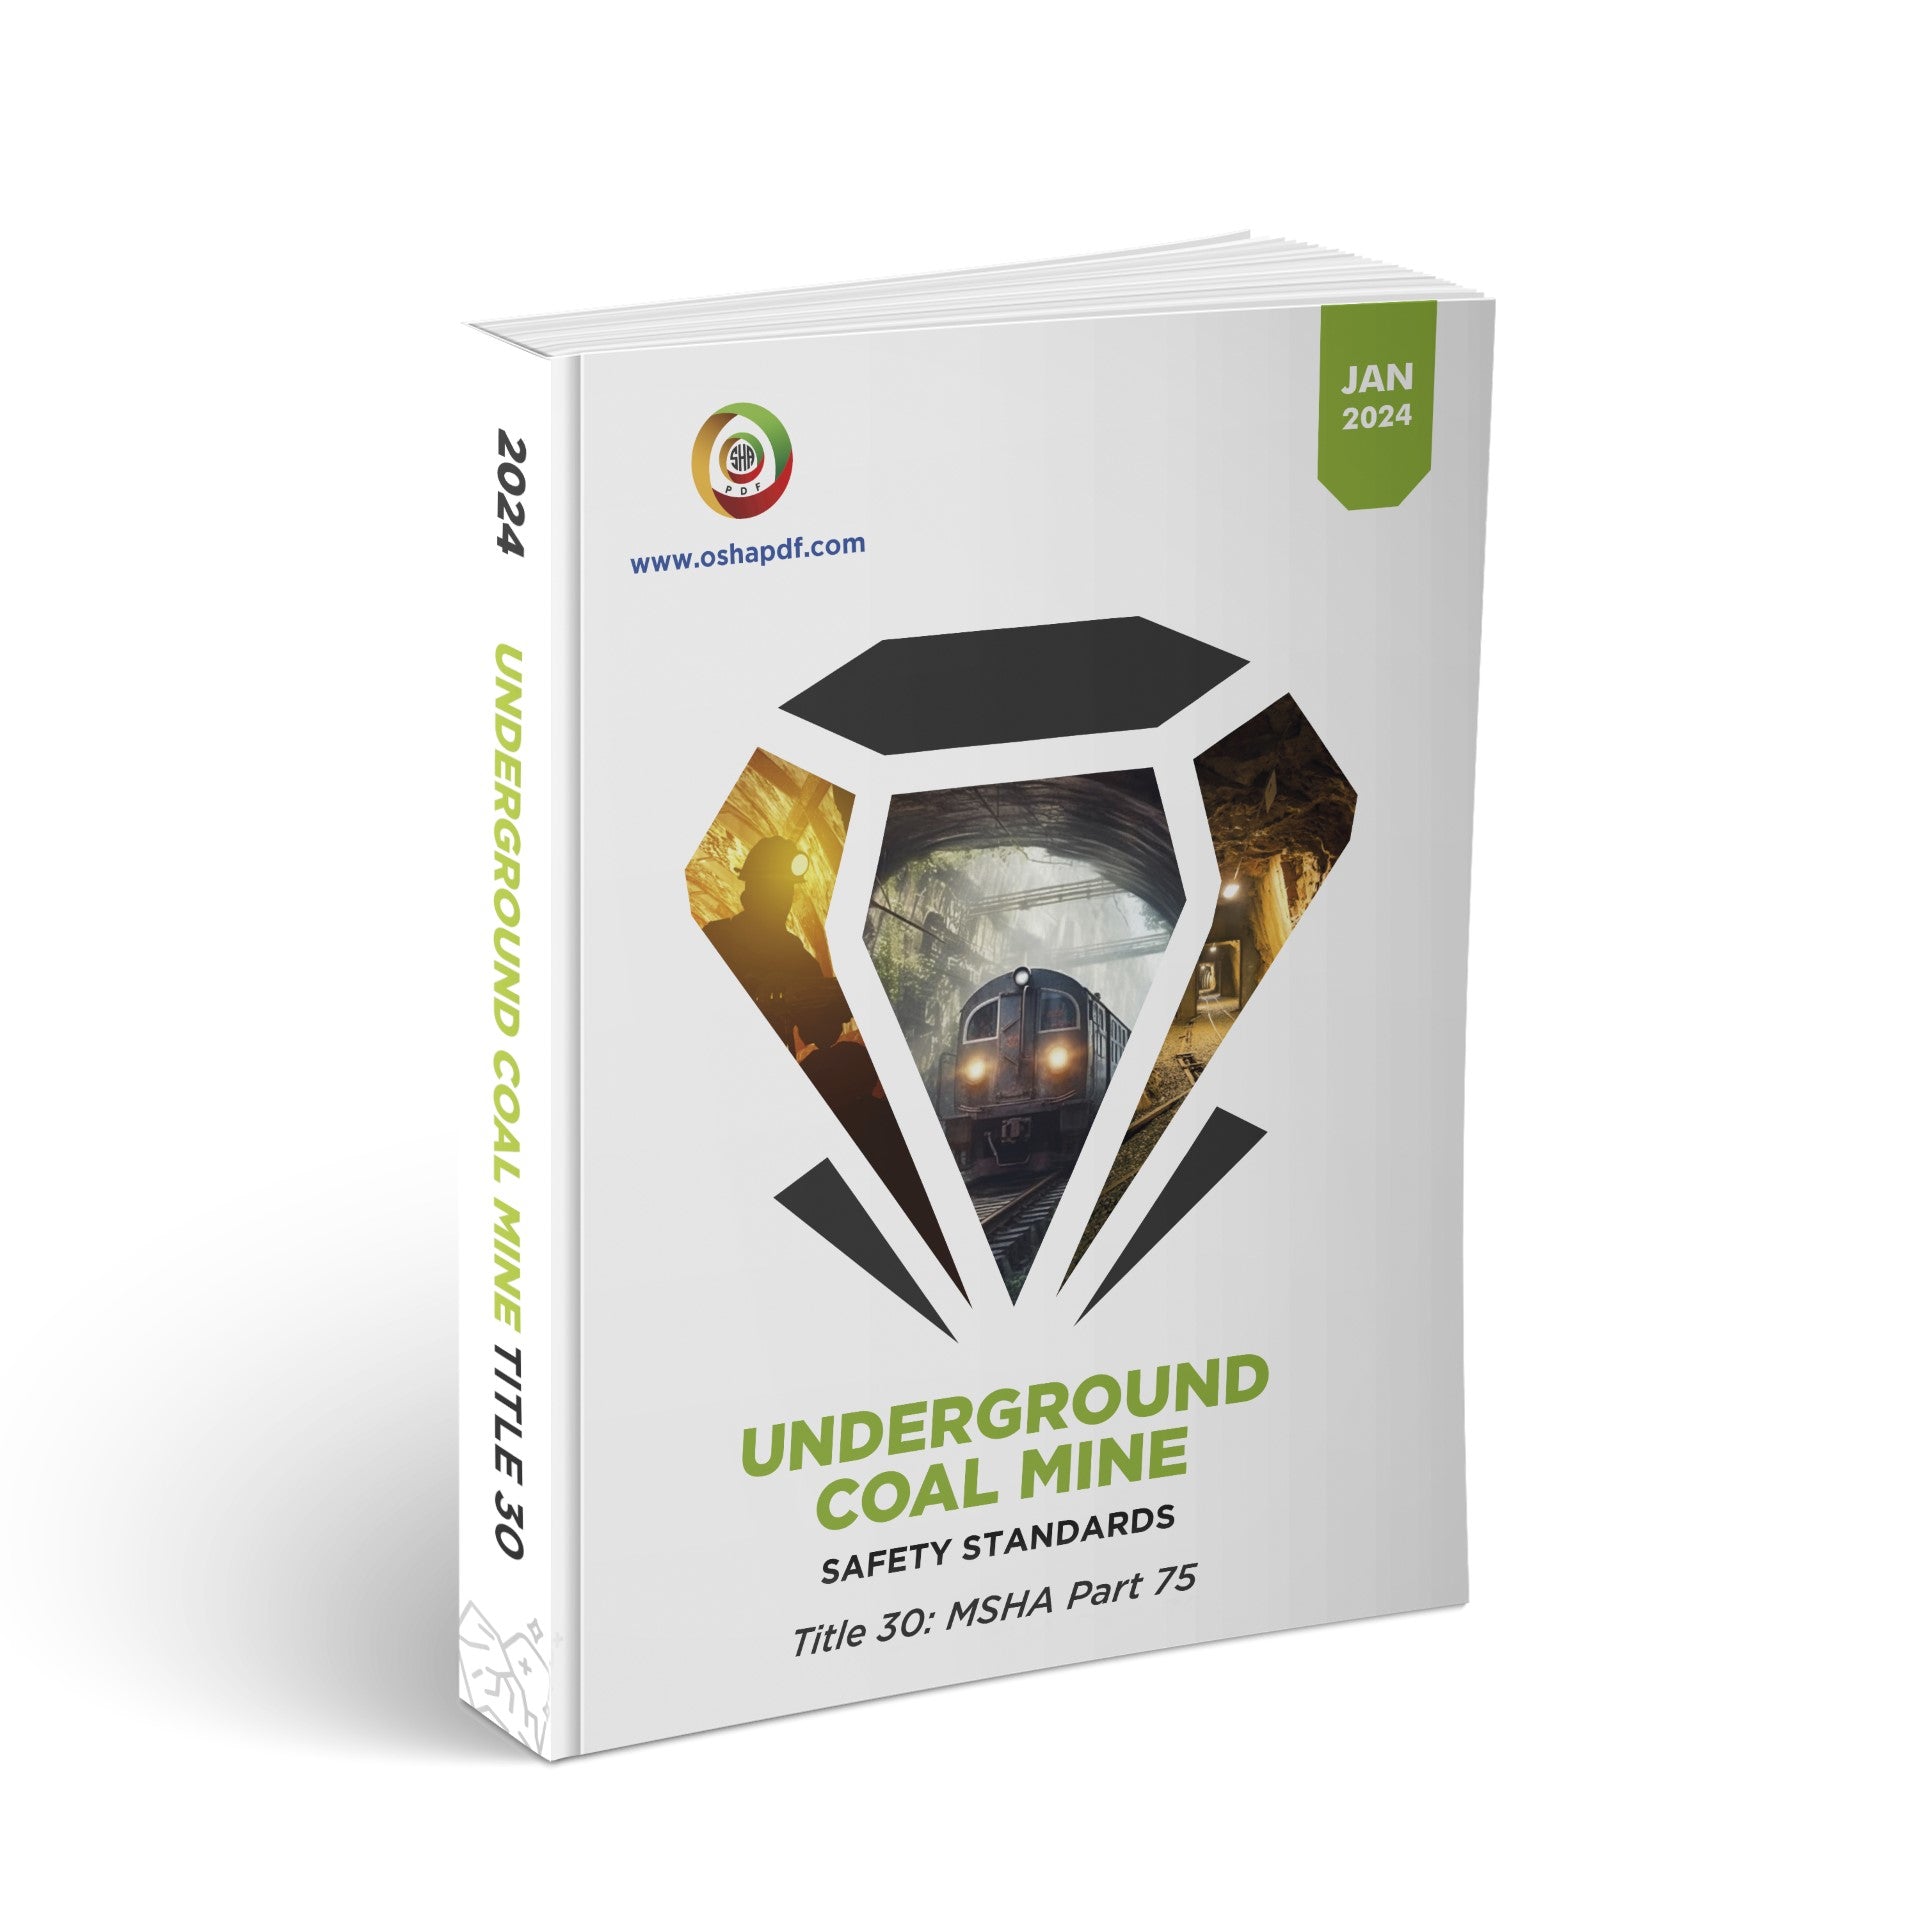 Underground Coal Mine Safety Standards Pocket Guide - Title 30 Part 75 - January 2024